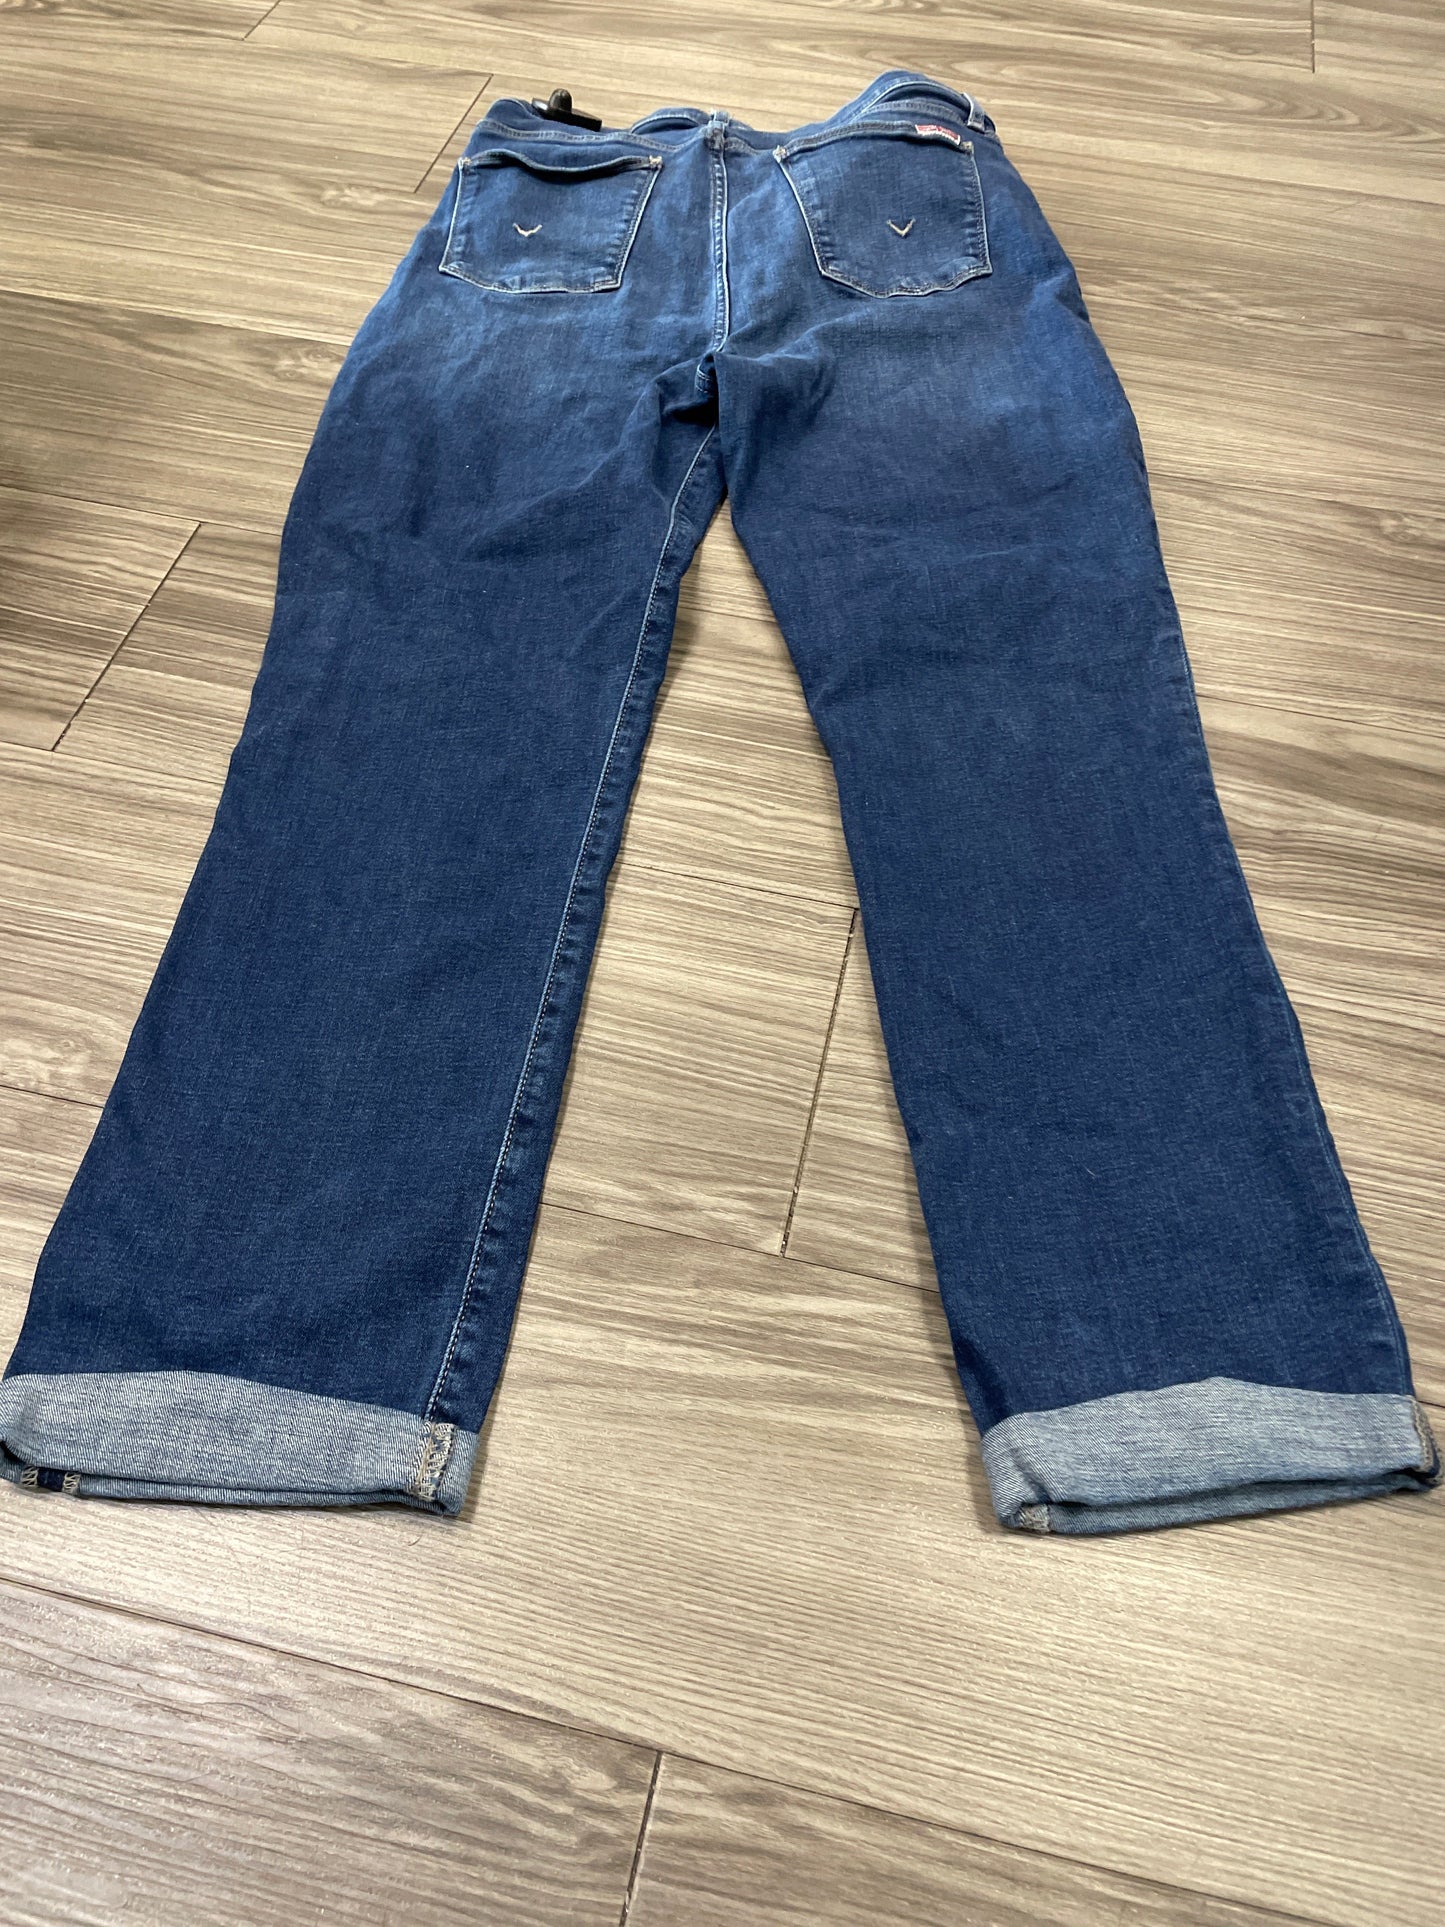 Jeans Cropped By Hudson  Size: 14